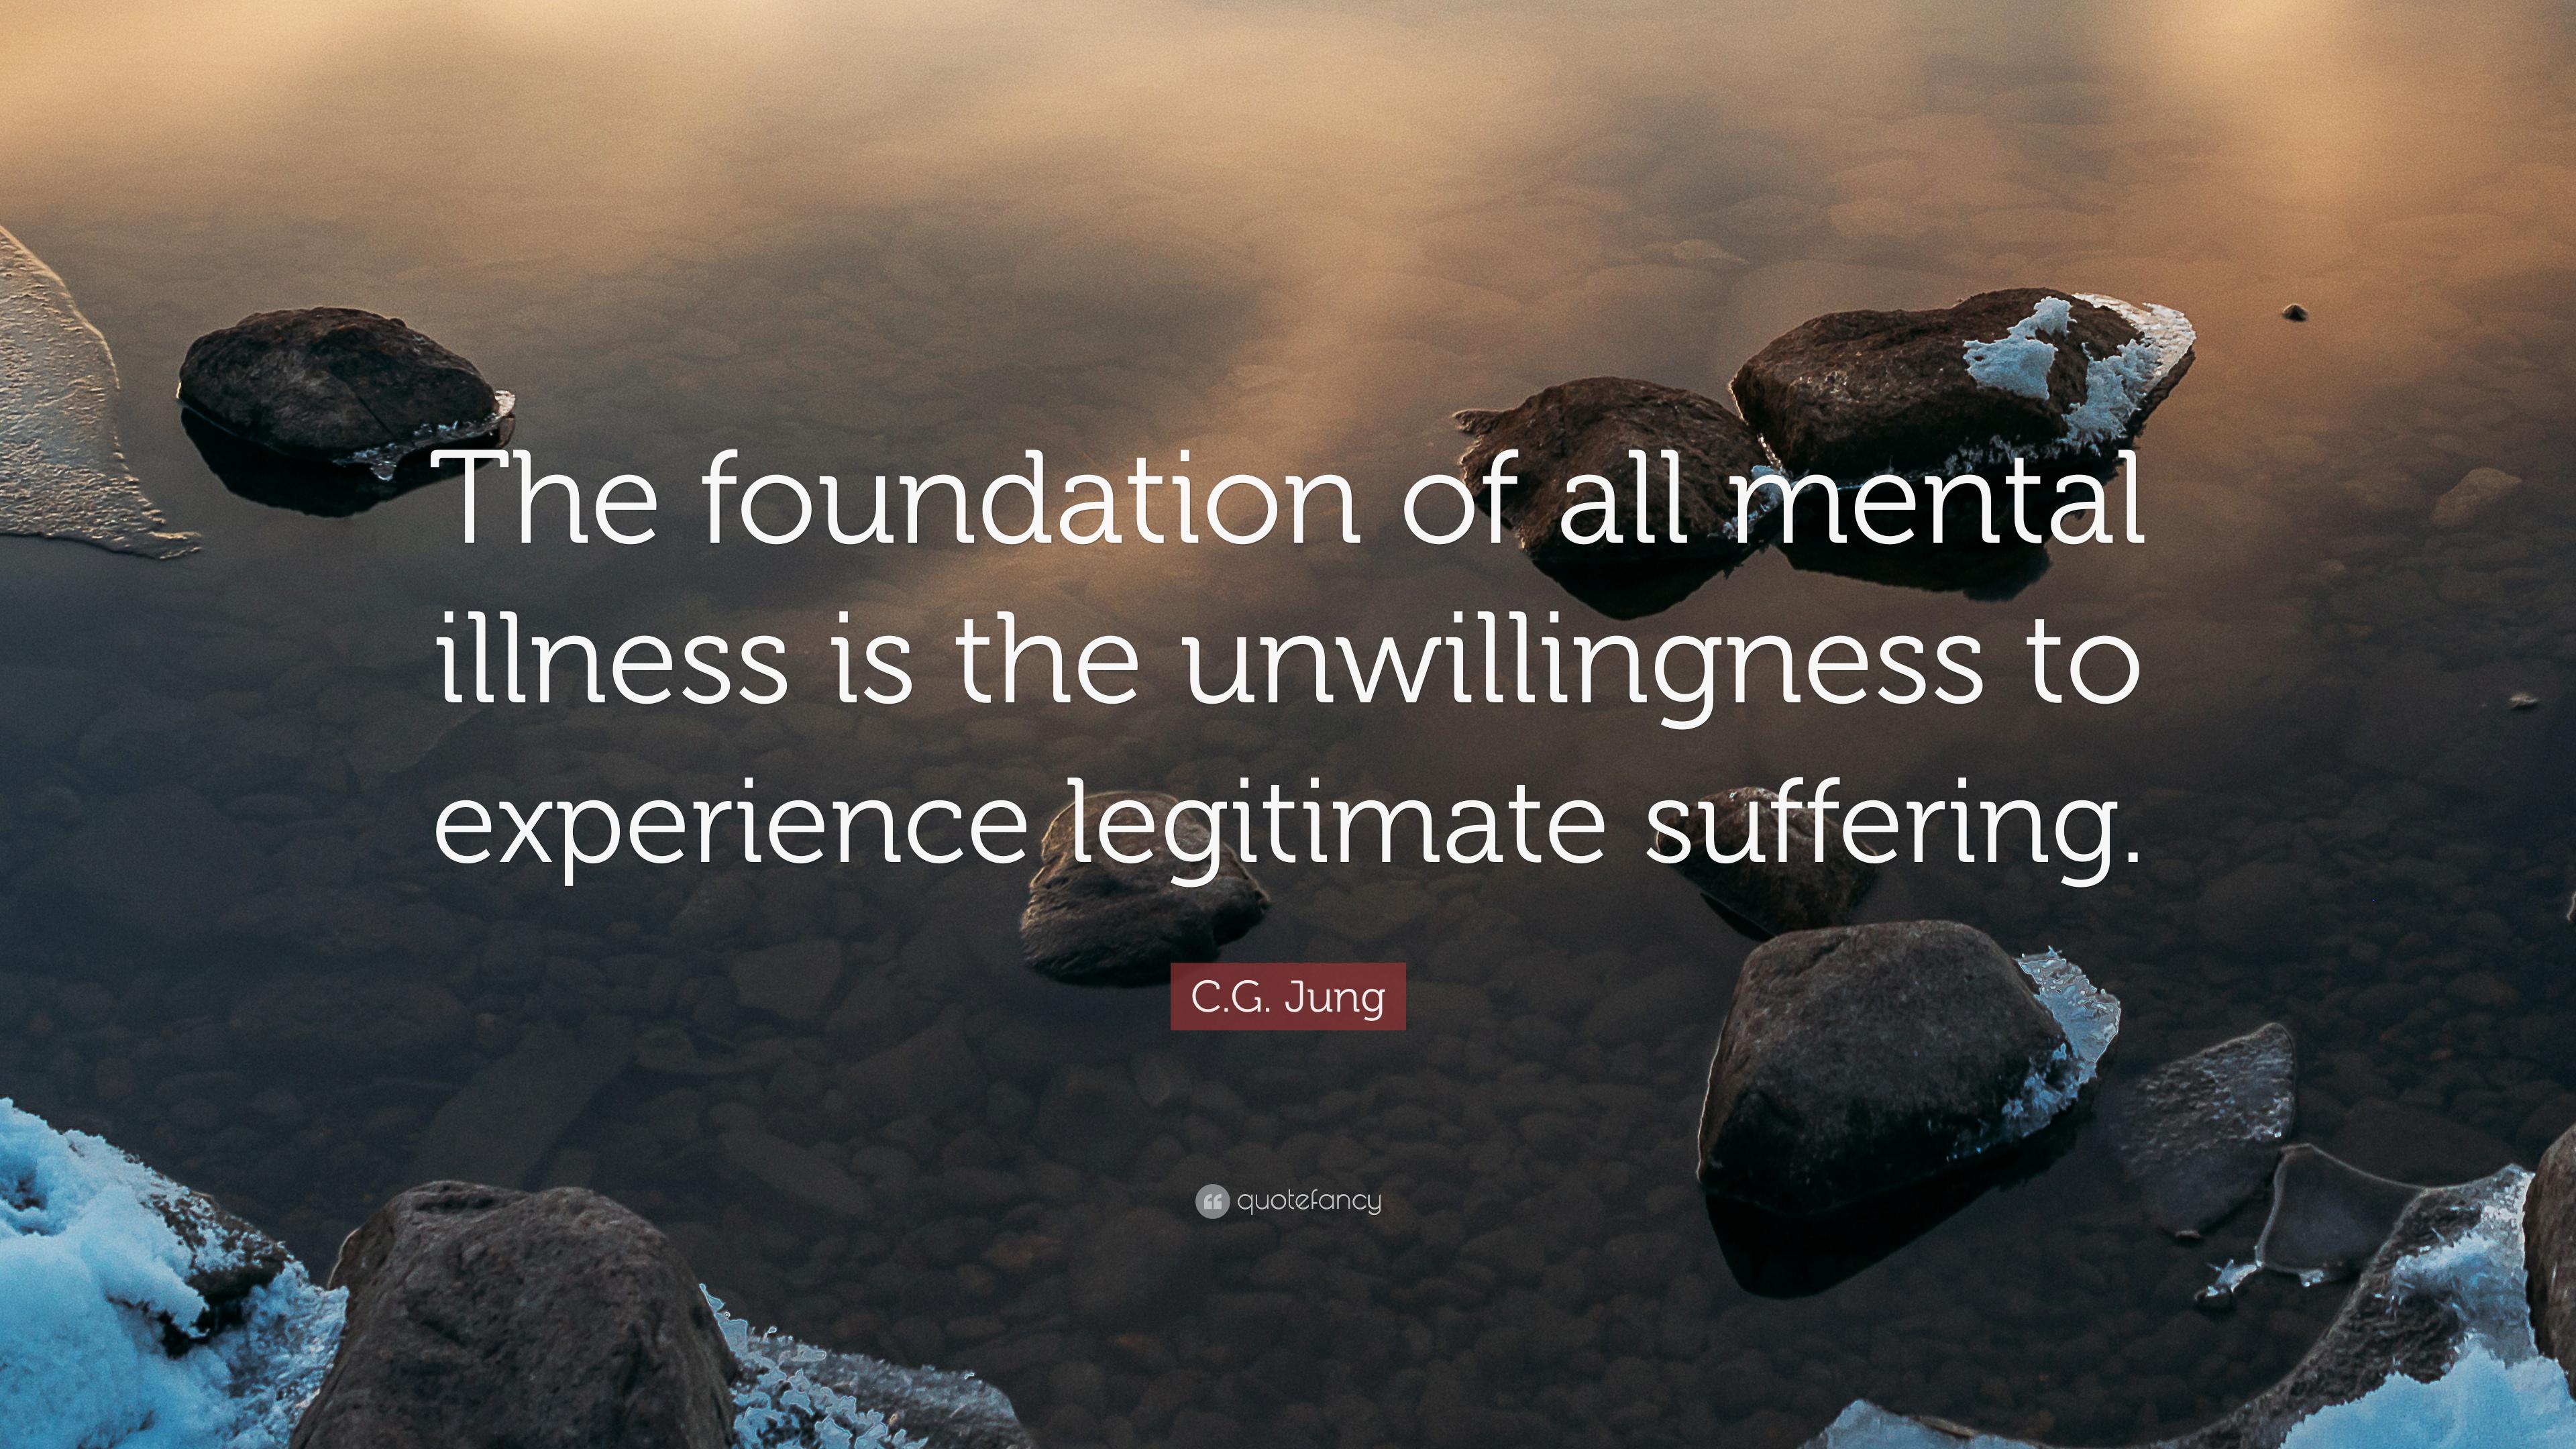 C.G. Jung Quote: “The foundation of all mental illness is